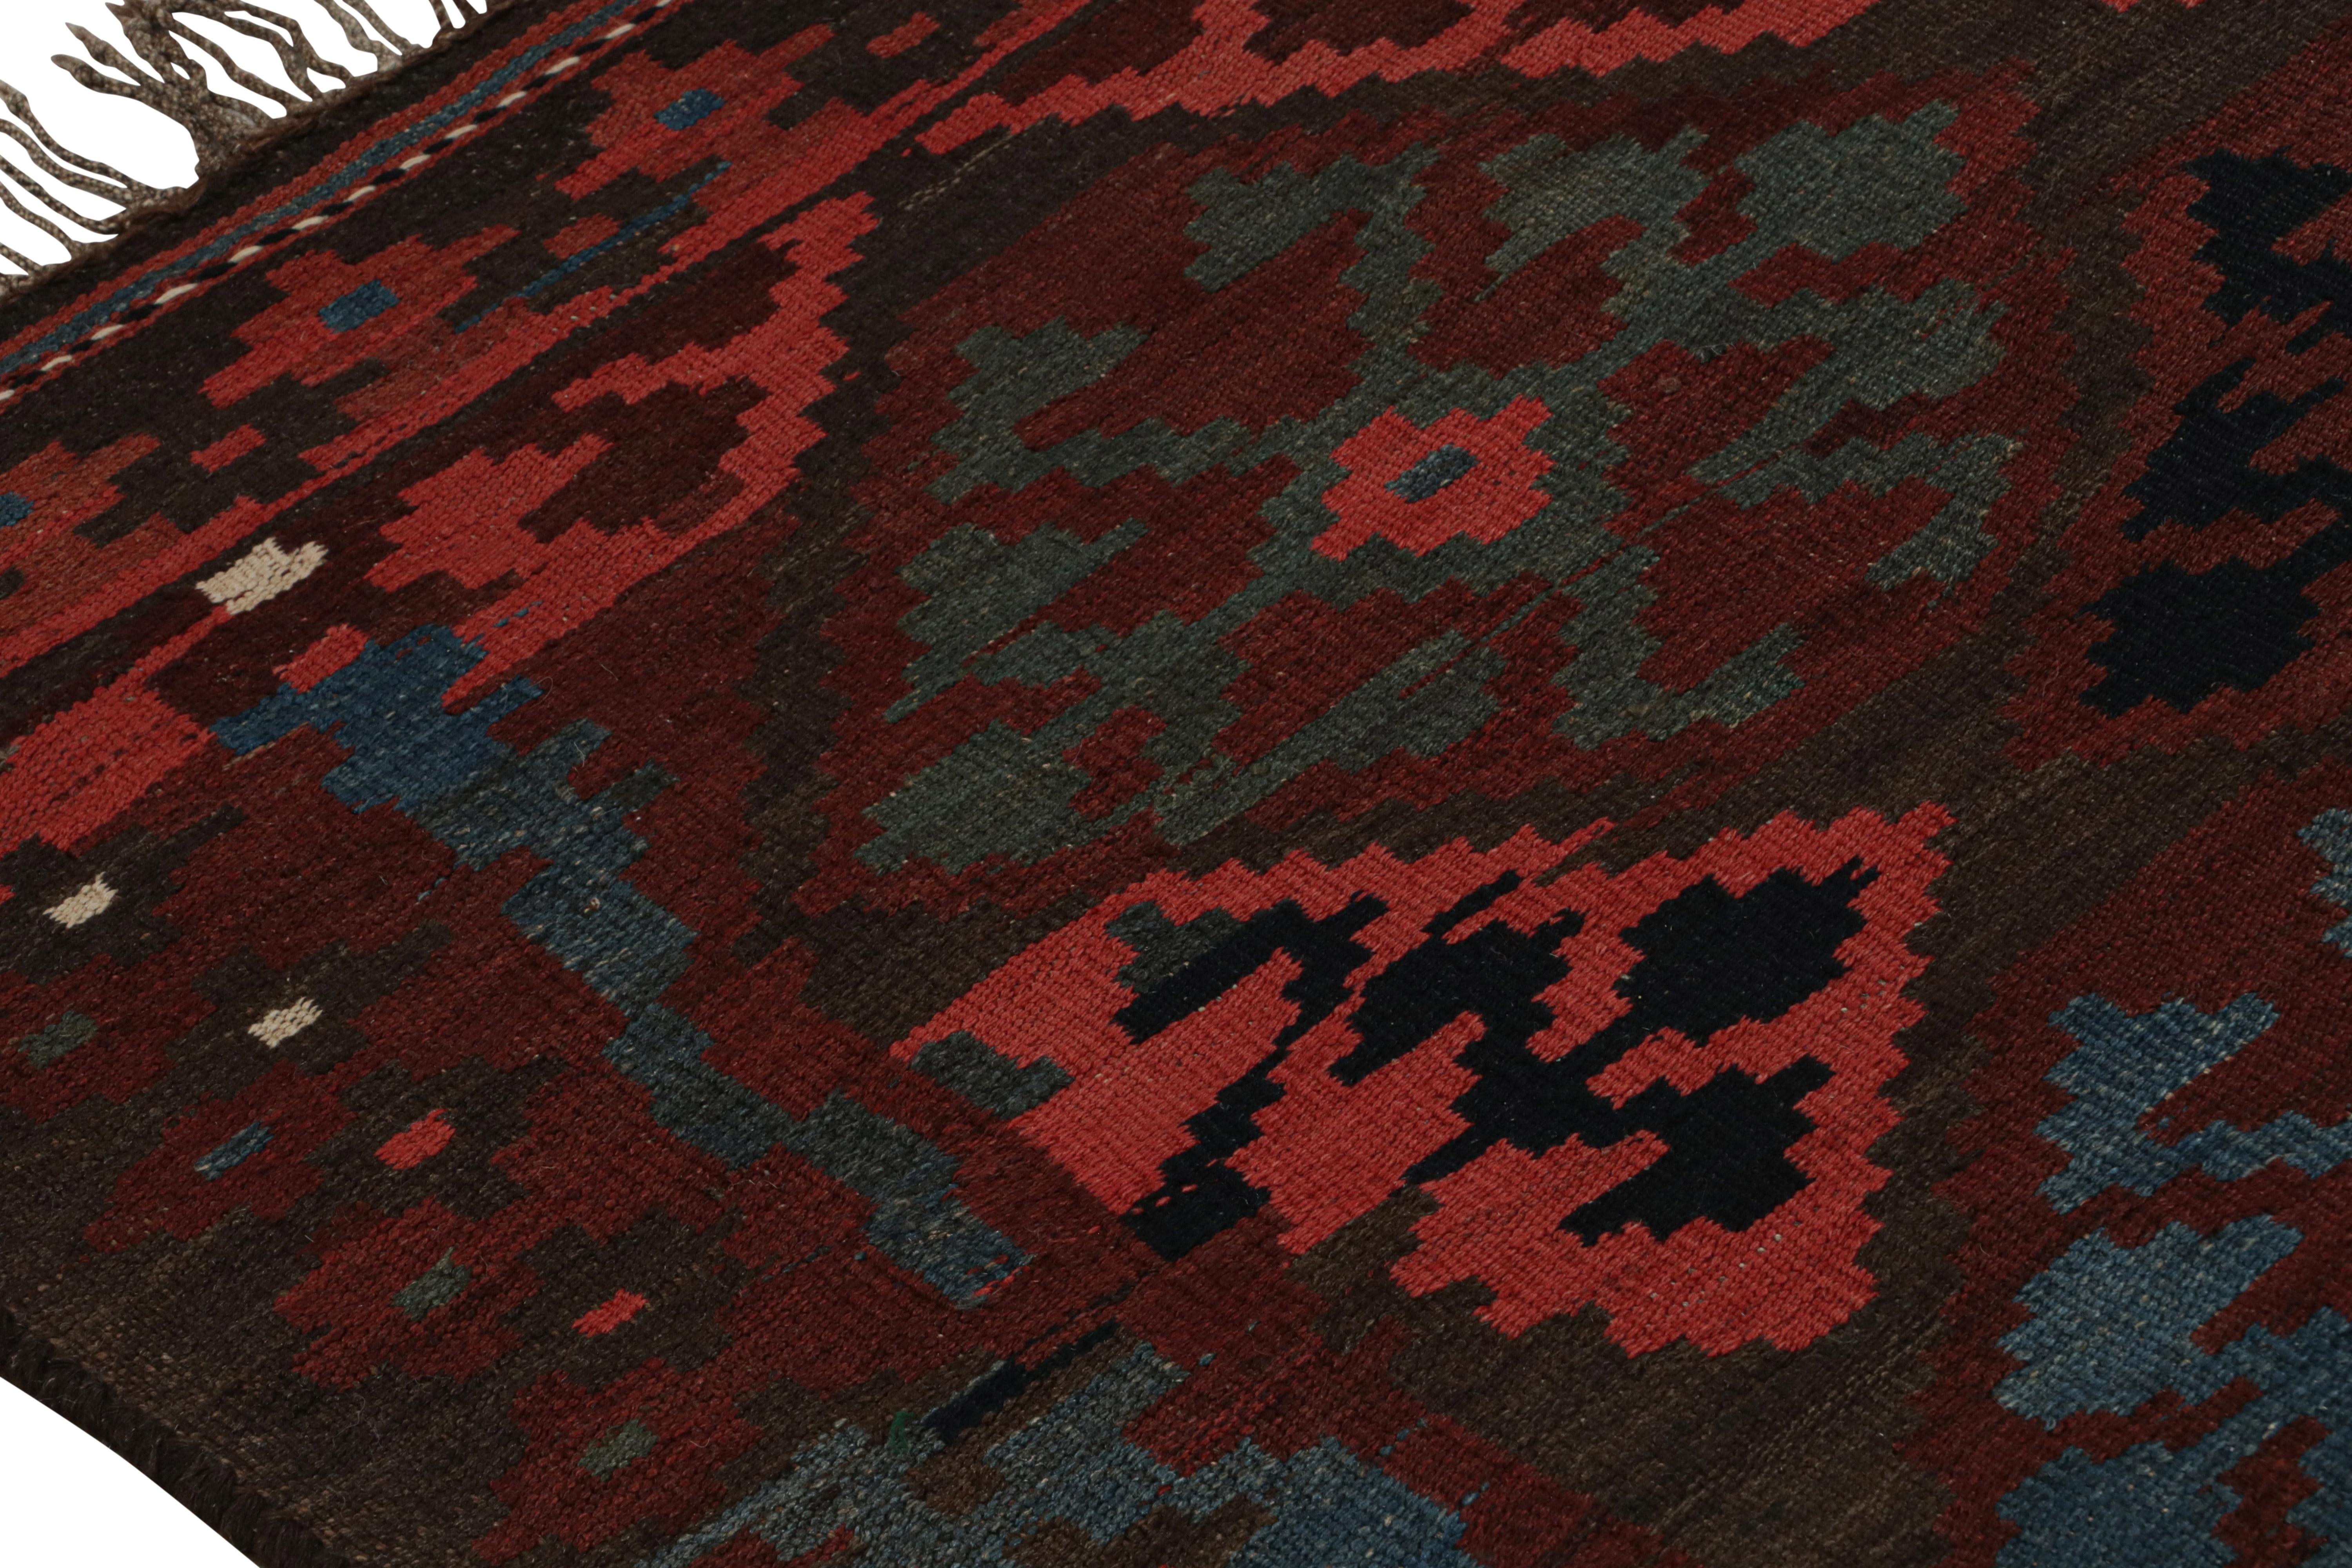 Vintage Tribal Kilim in Red, Blue-Brown Geometric Patterns, from Rug & Kilim In Good Condition For Sale In Long Island City, NY